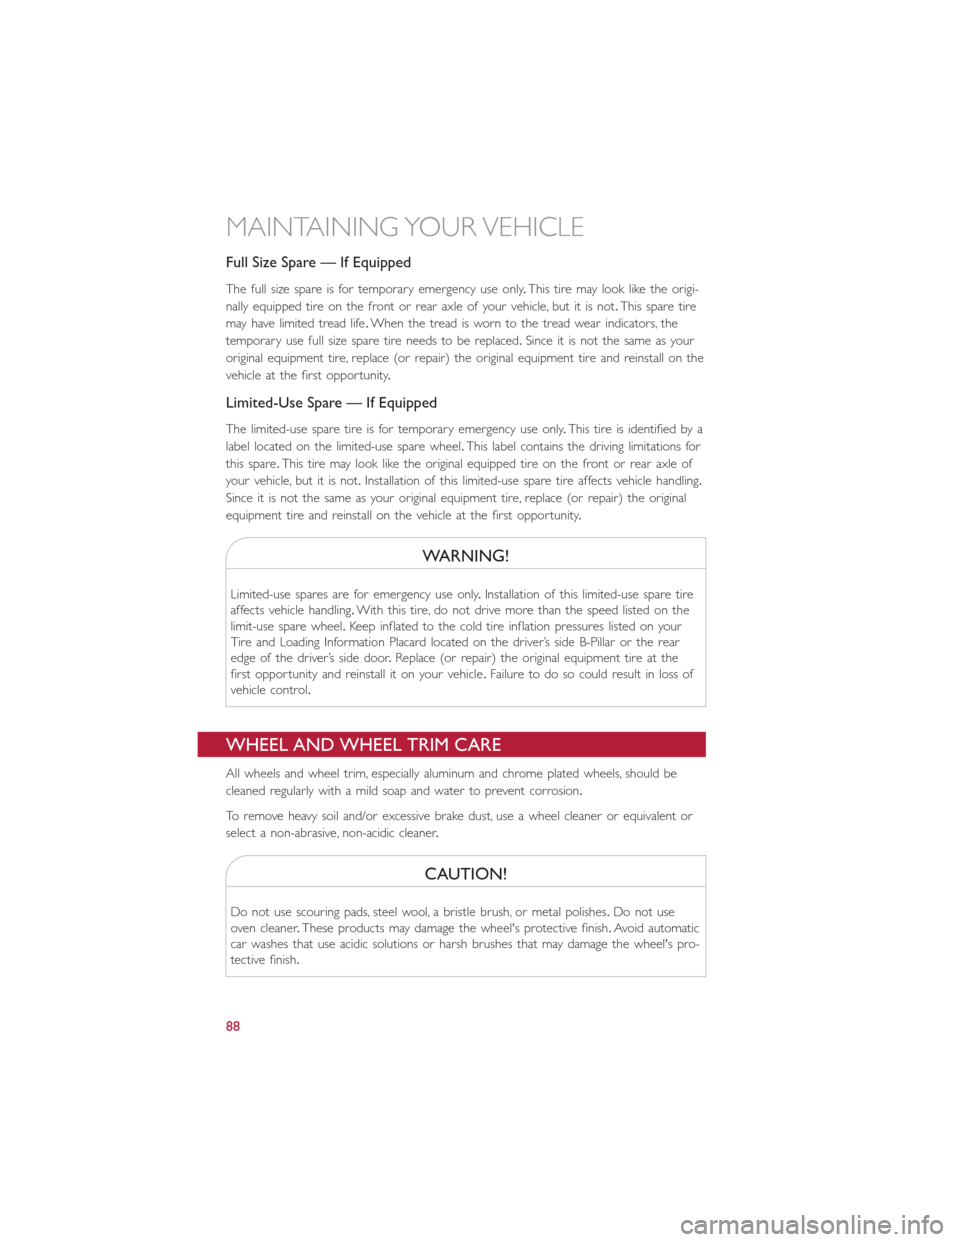 FIAT 500E 2015 2.G User Guide Full Size Spare — If Equipped
The full size spare is for temporary emergency use only.This tire may look like the origi-
nally equipped tire on the front or rear axle of your vehicle, but it is not.